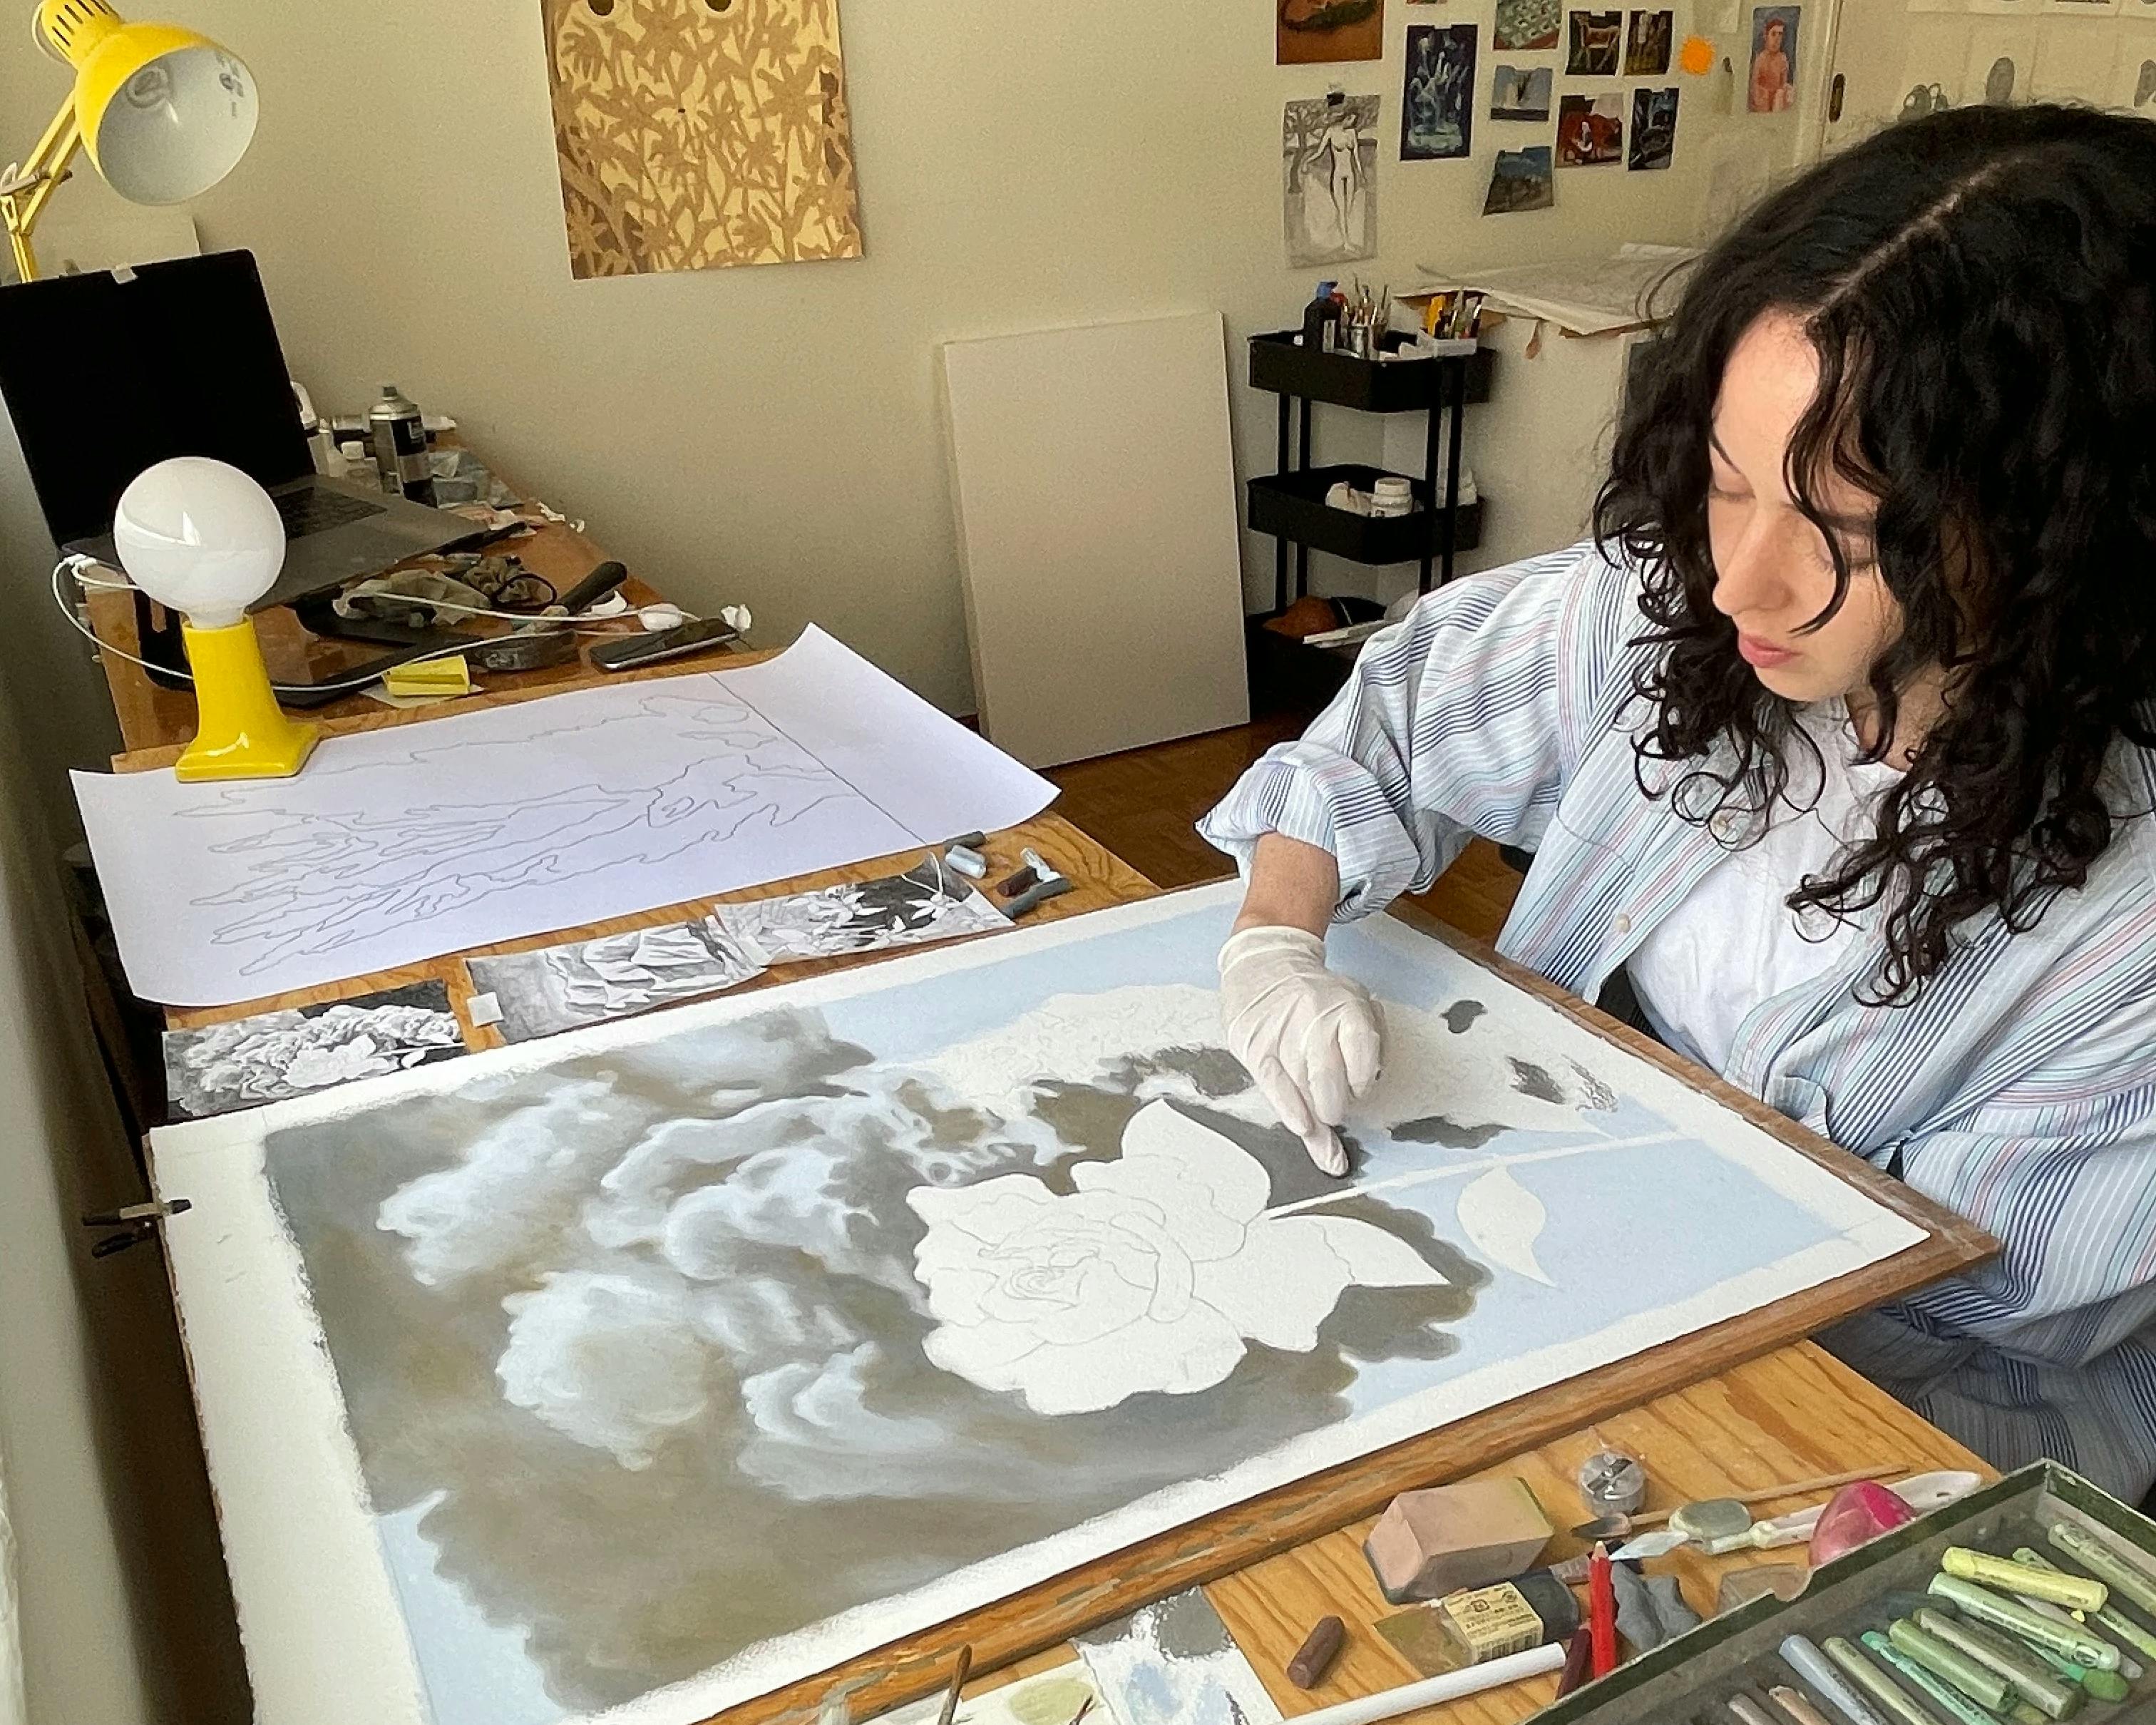 Artist Rachel Levit Ruiz wearing white gloves and smudging charcoal pastel on a drawing of flowers in clouds.